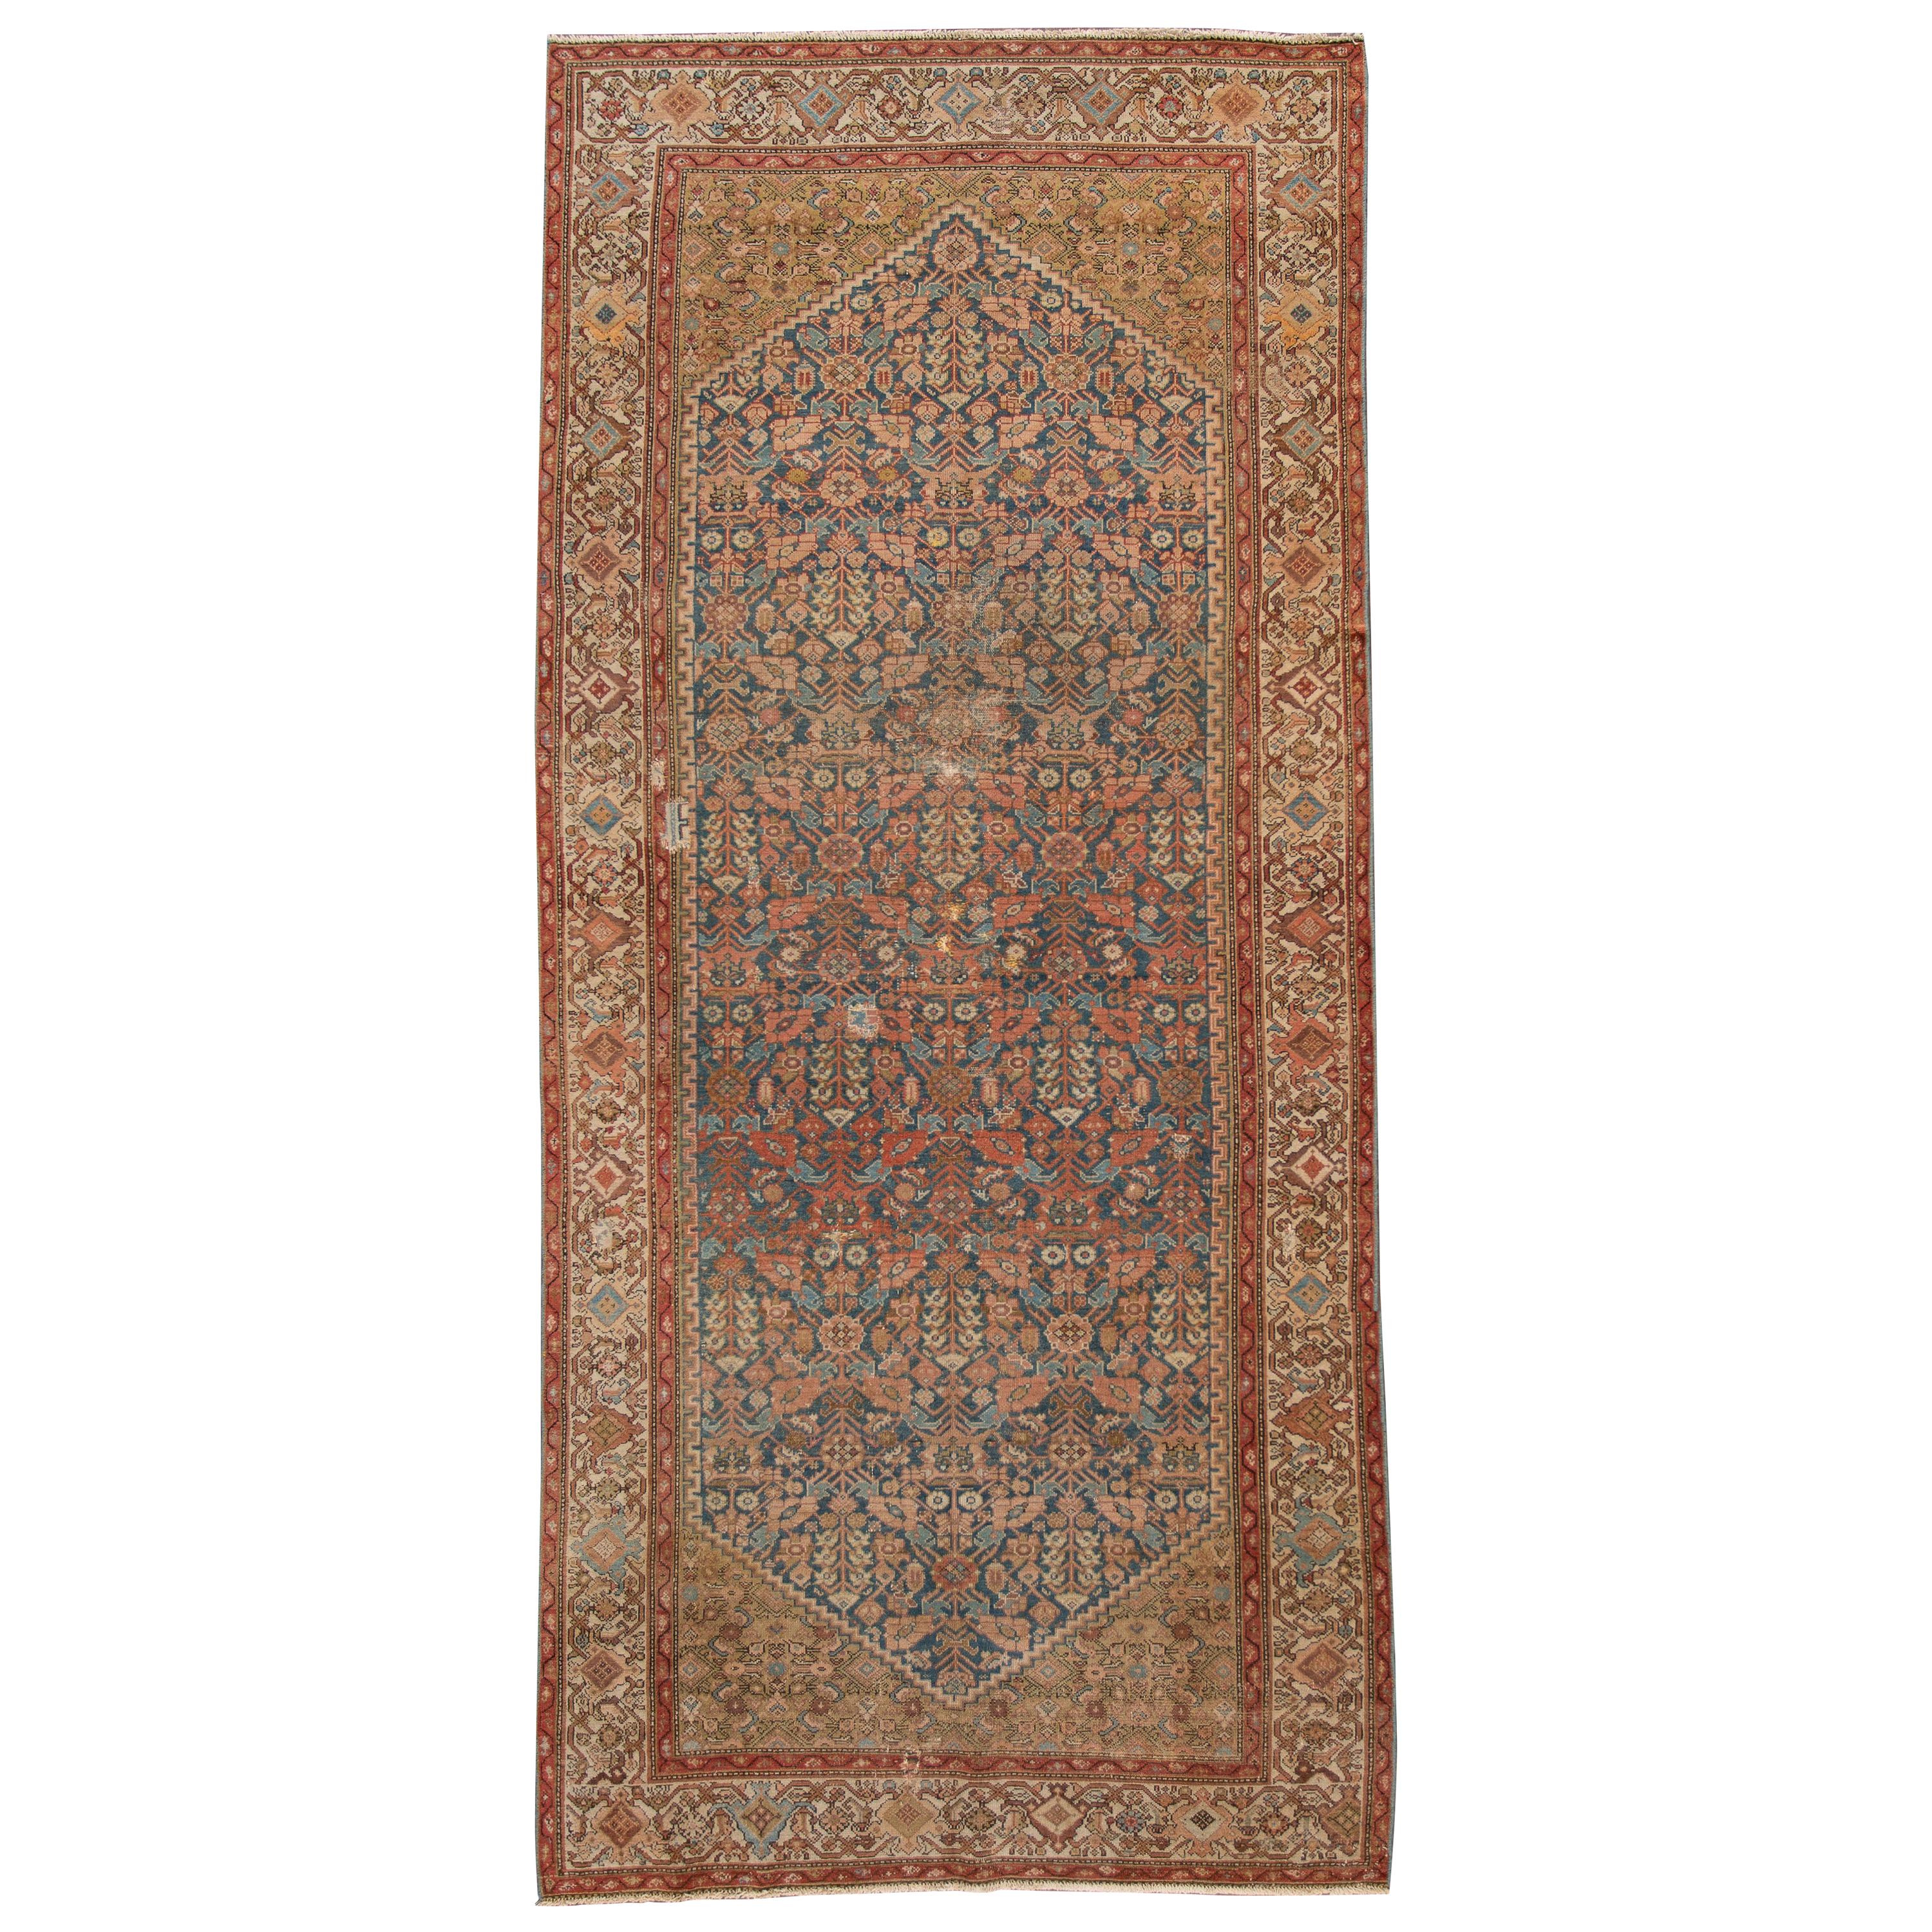 Early 20th Century Vintage Persian Malayer Runner Rug 